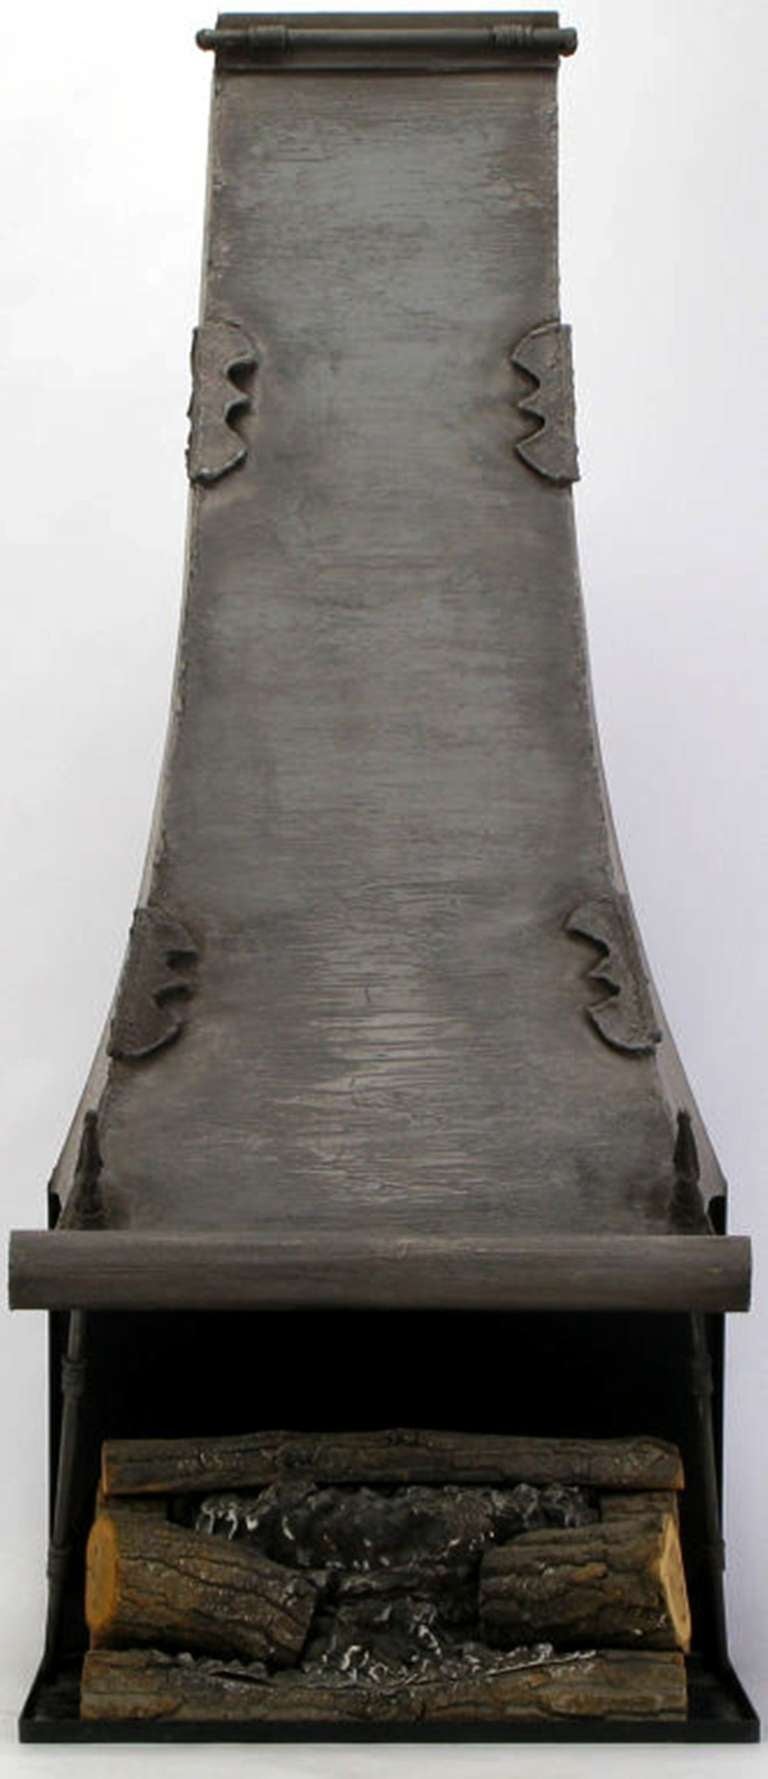 Spanish revival hammered iron and black lacquered steel fireplace with Gothic spear details. Comes with wood logs. For decorative use only. Can be hung on a wall or placed on stone or brick plinth.